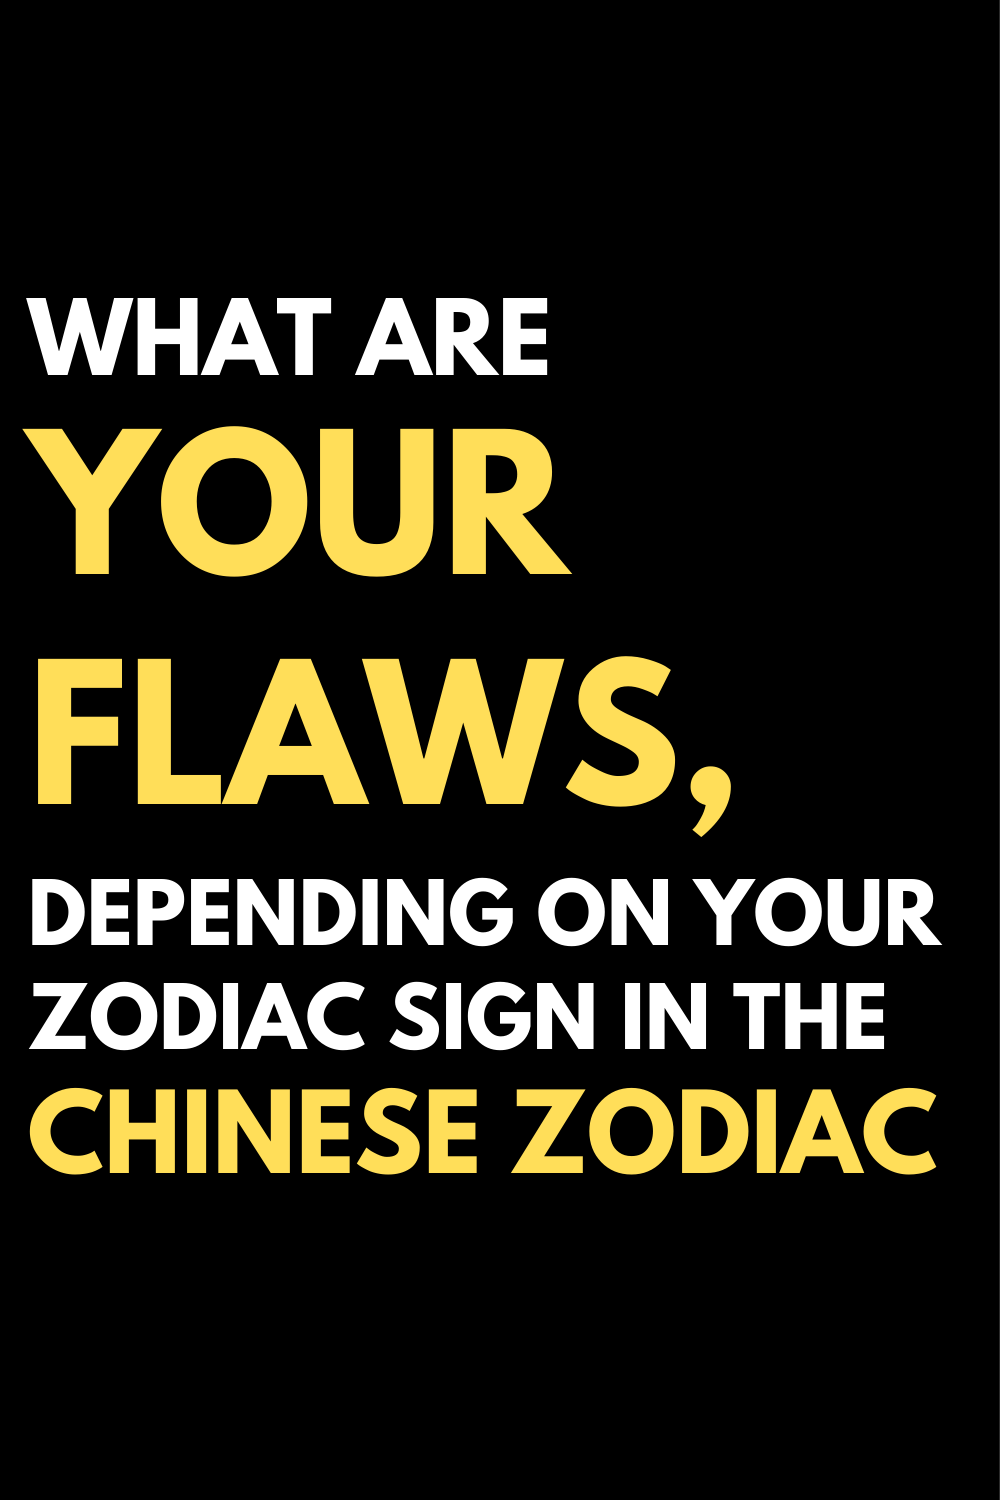 What are your flaws, depending on your zodiac sign in the Chinese zodiac